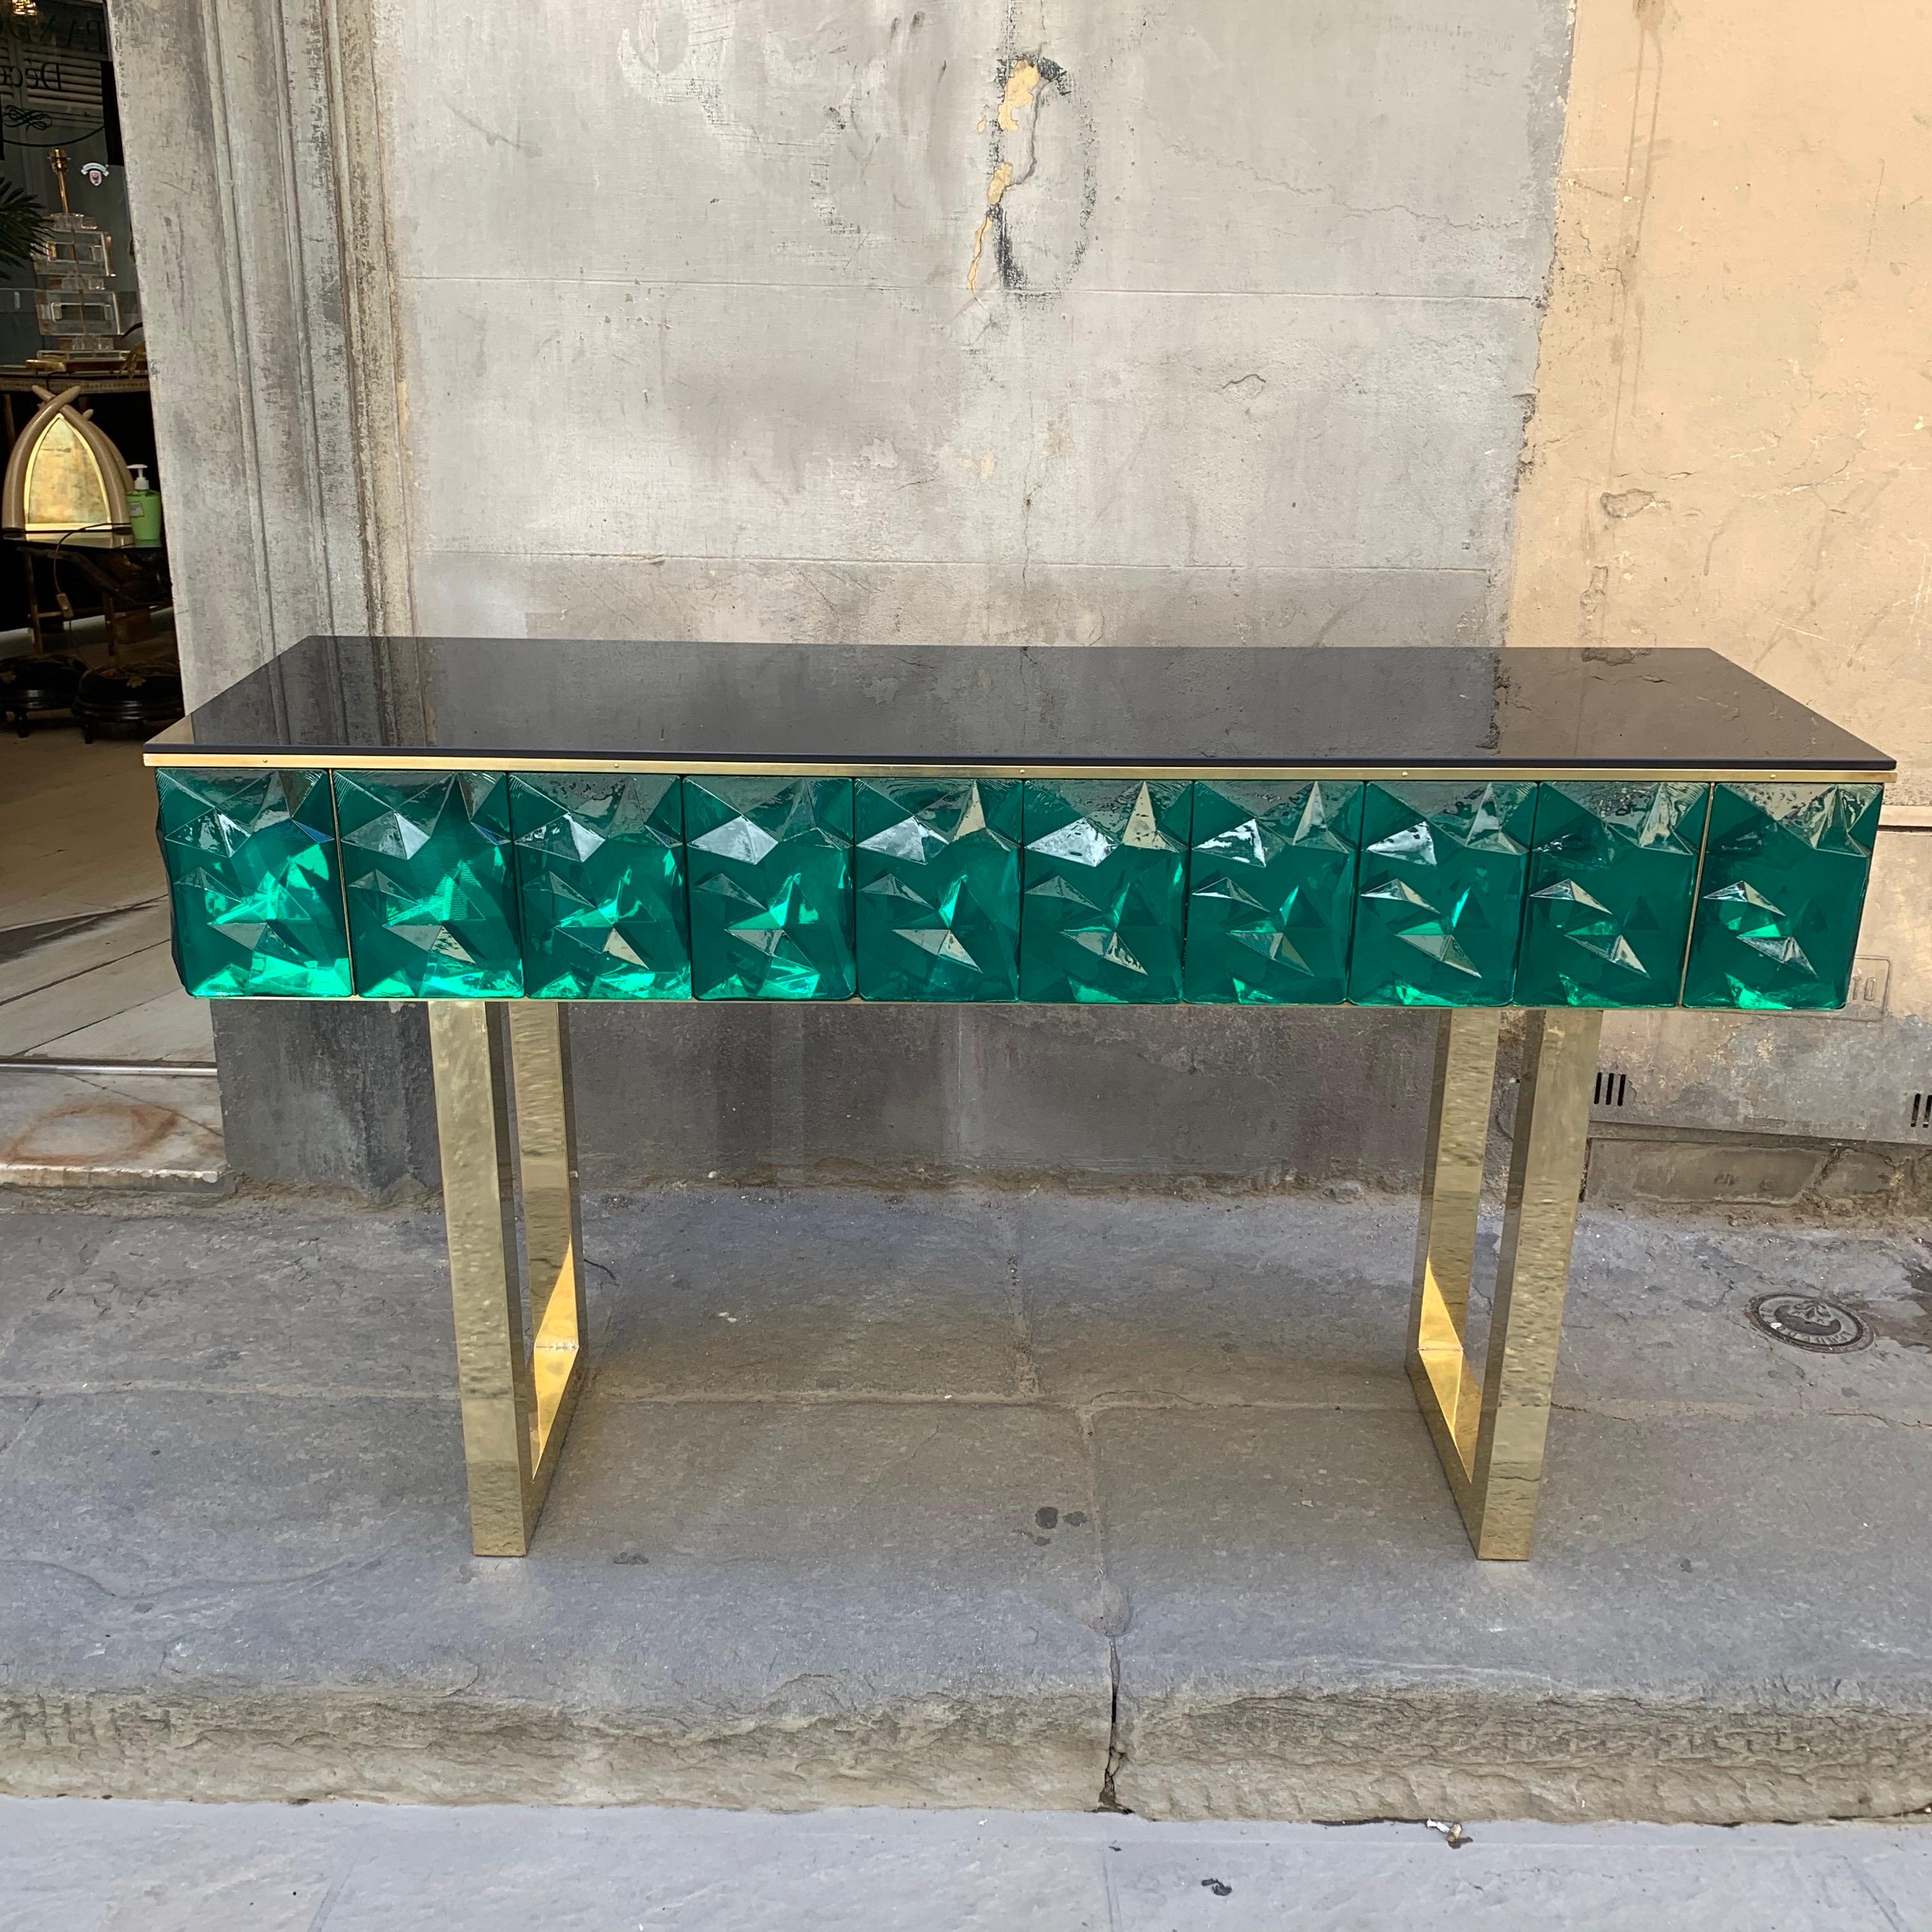 Contemporary emerald glass console with black opaline glass top and brass legs.
The emerald green Murano glass has a faceted shape diamond effect, the light passing through creates an amazing sparkling effect.
Italian Design, high-quality Italian